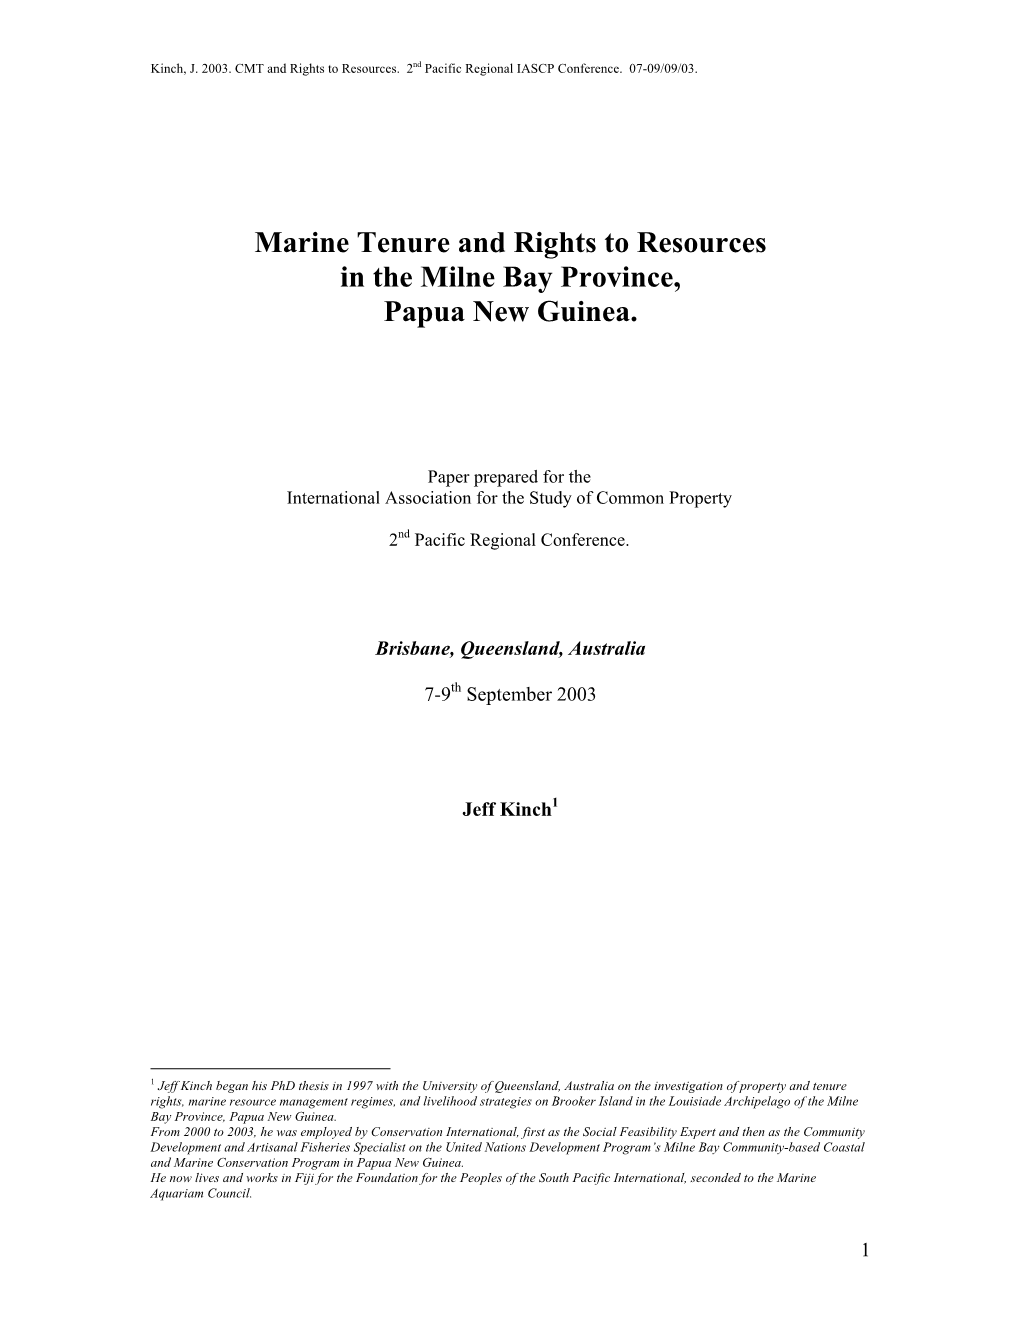 Marine Tenure and Rights to Resources in the Milne Bay Province, Papua New Guinea